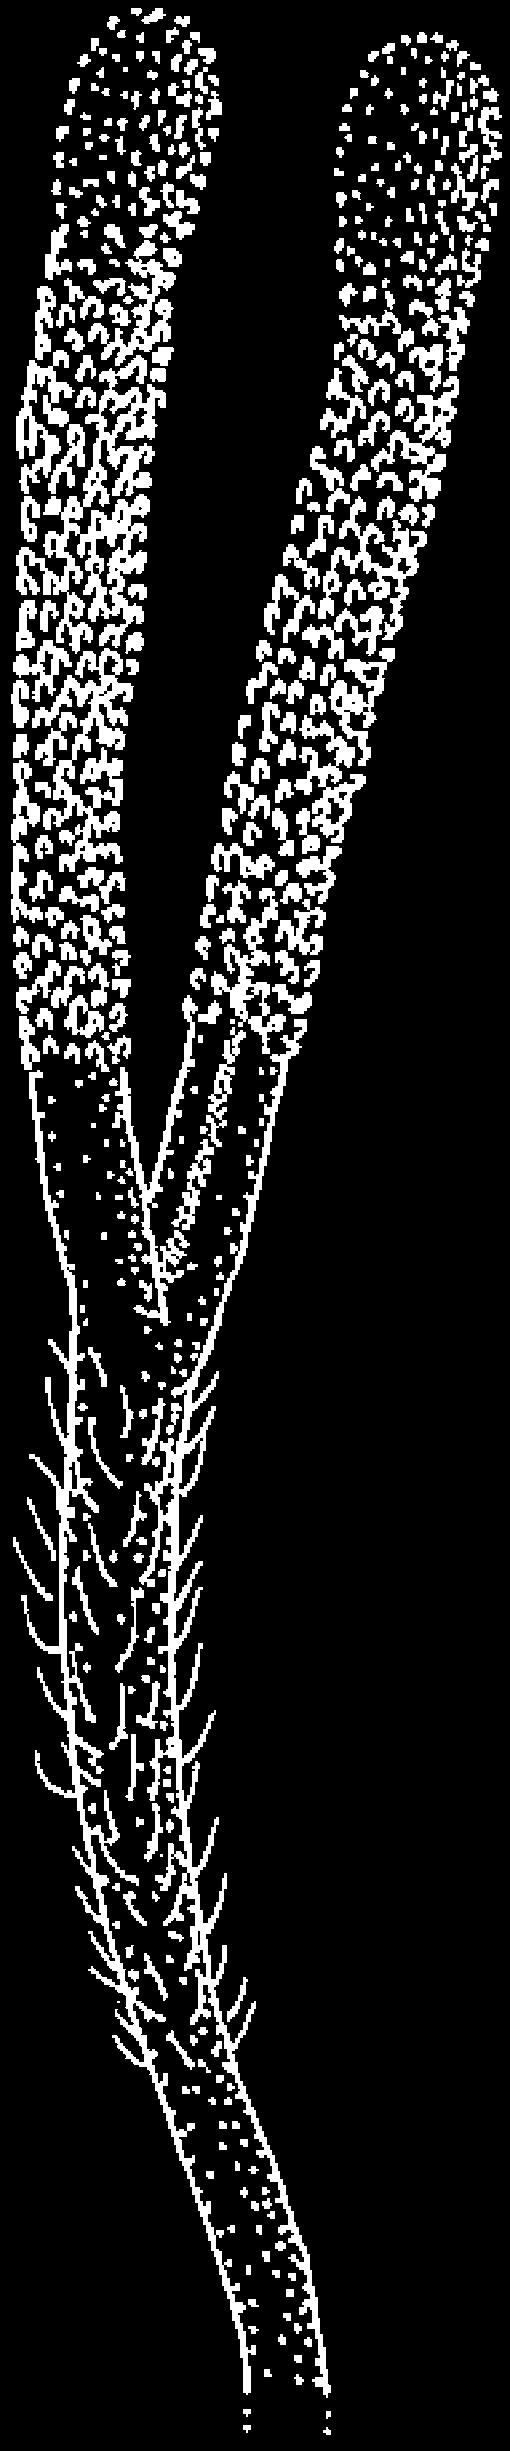 Scale-like appendages on epaleate receptacle of Baccharis dracunculifolia DC. Fig. 86.